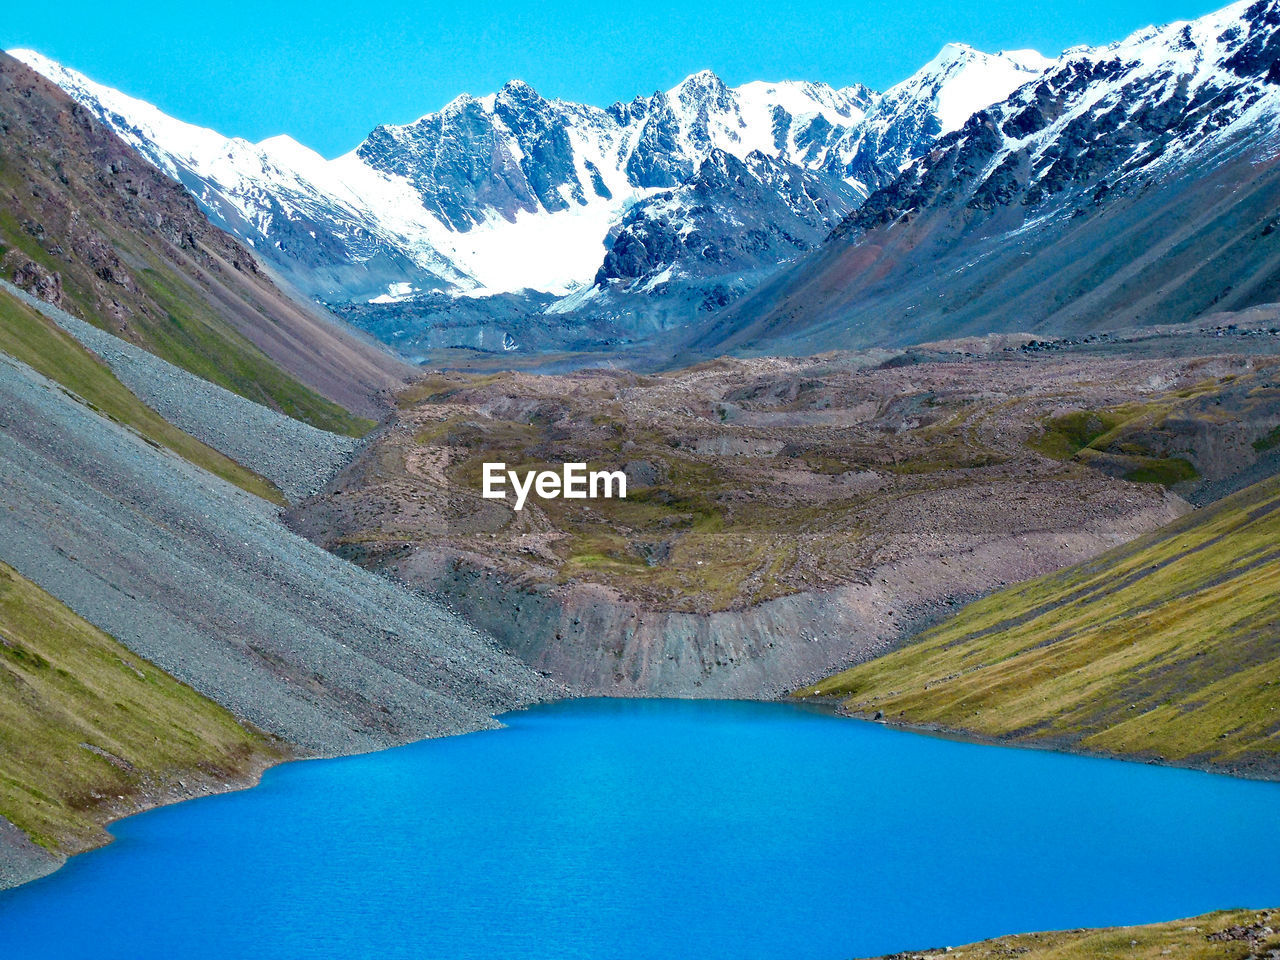 HIGH ANGLE VIEW OF LAKE AMIDST SNOWCAPPED MOUNTAINS AGAINST SKY